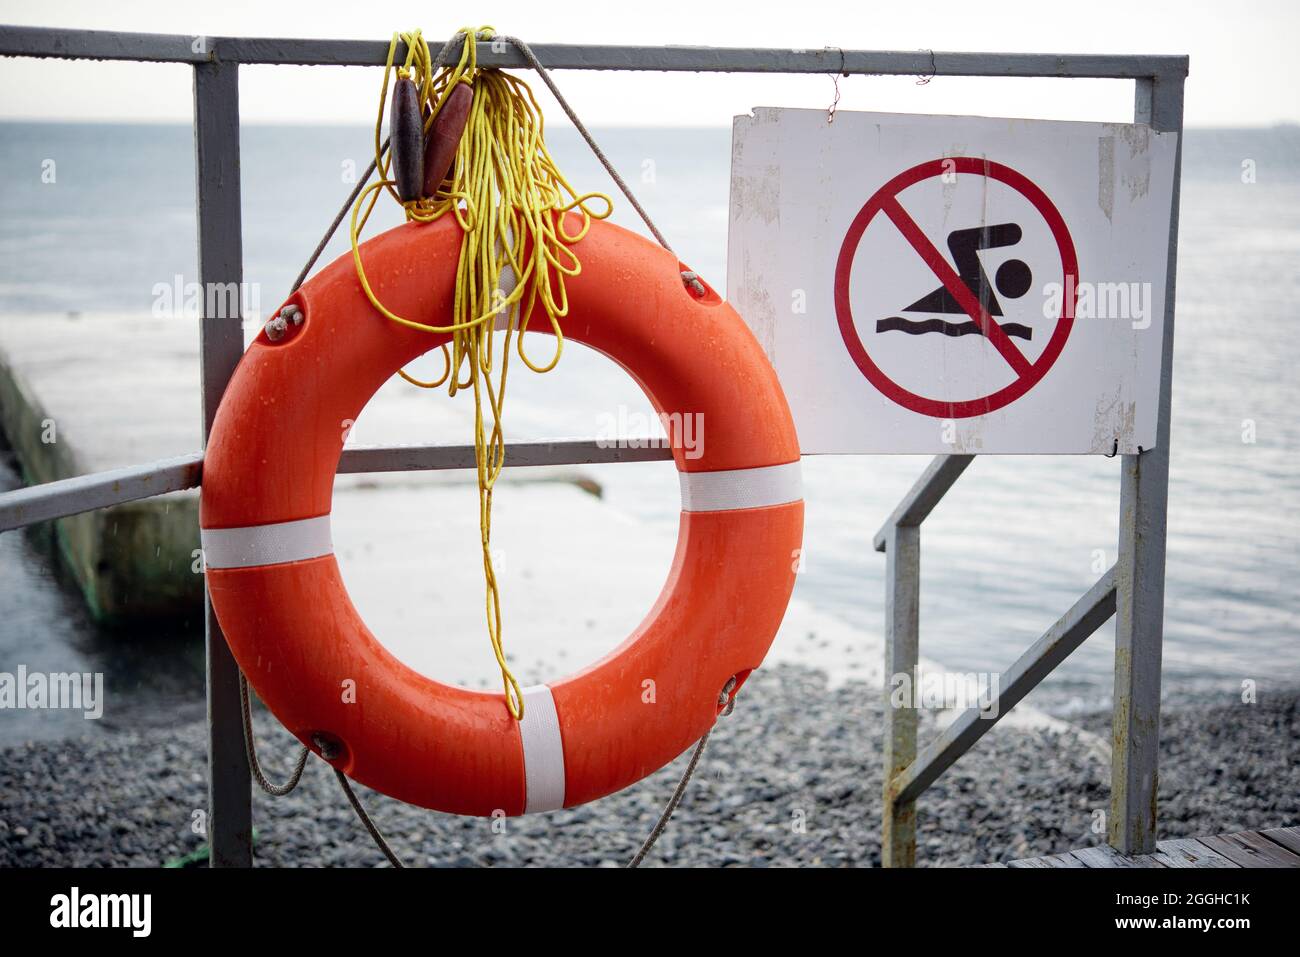 No swimming sign and orange lifebuoy at the beach during the storm Stock Photo